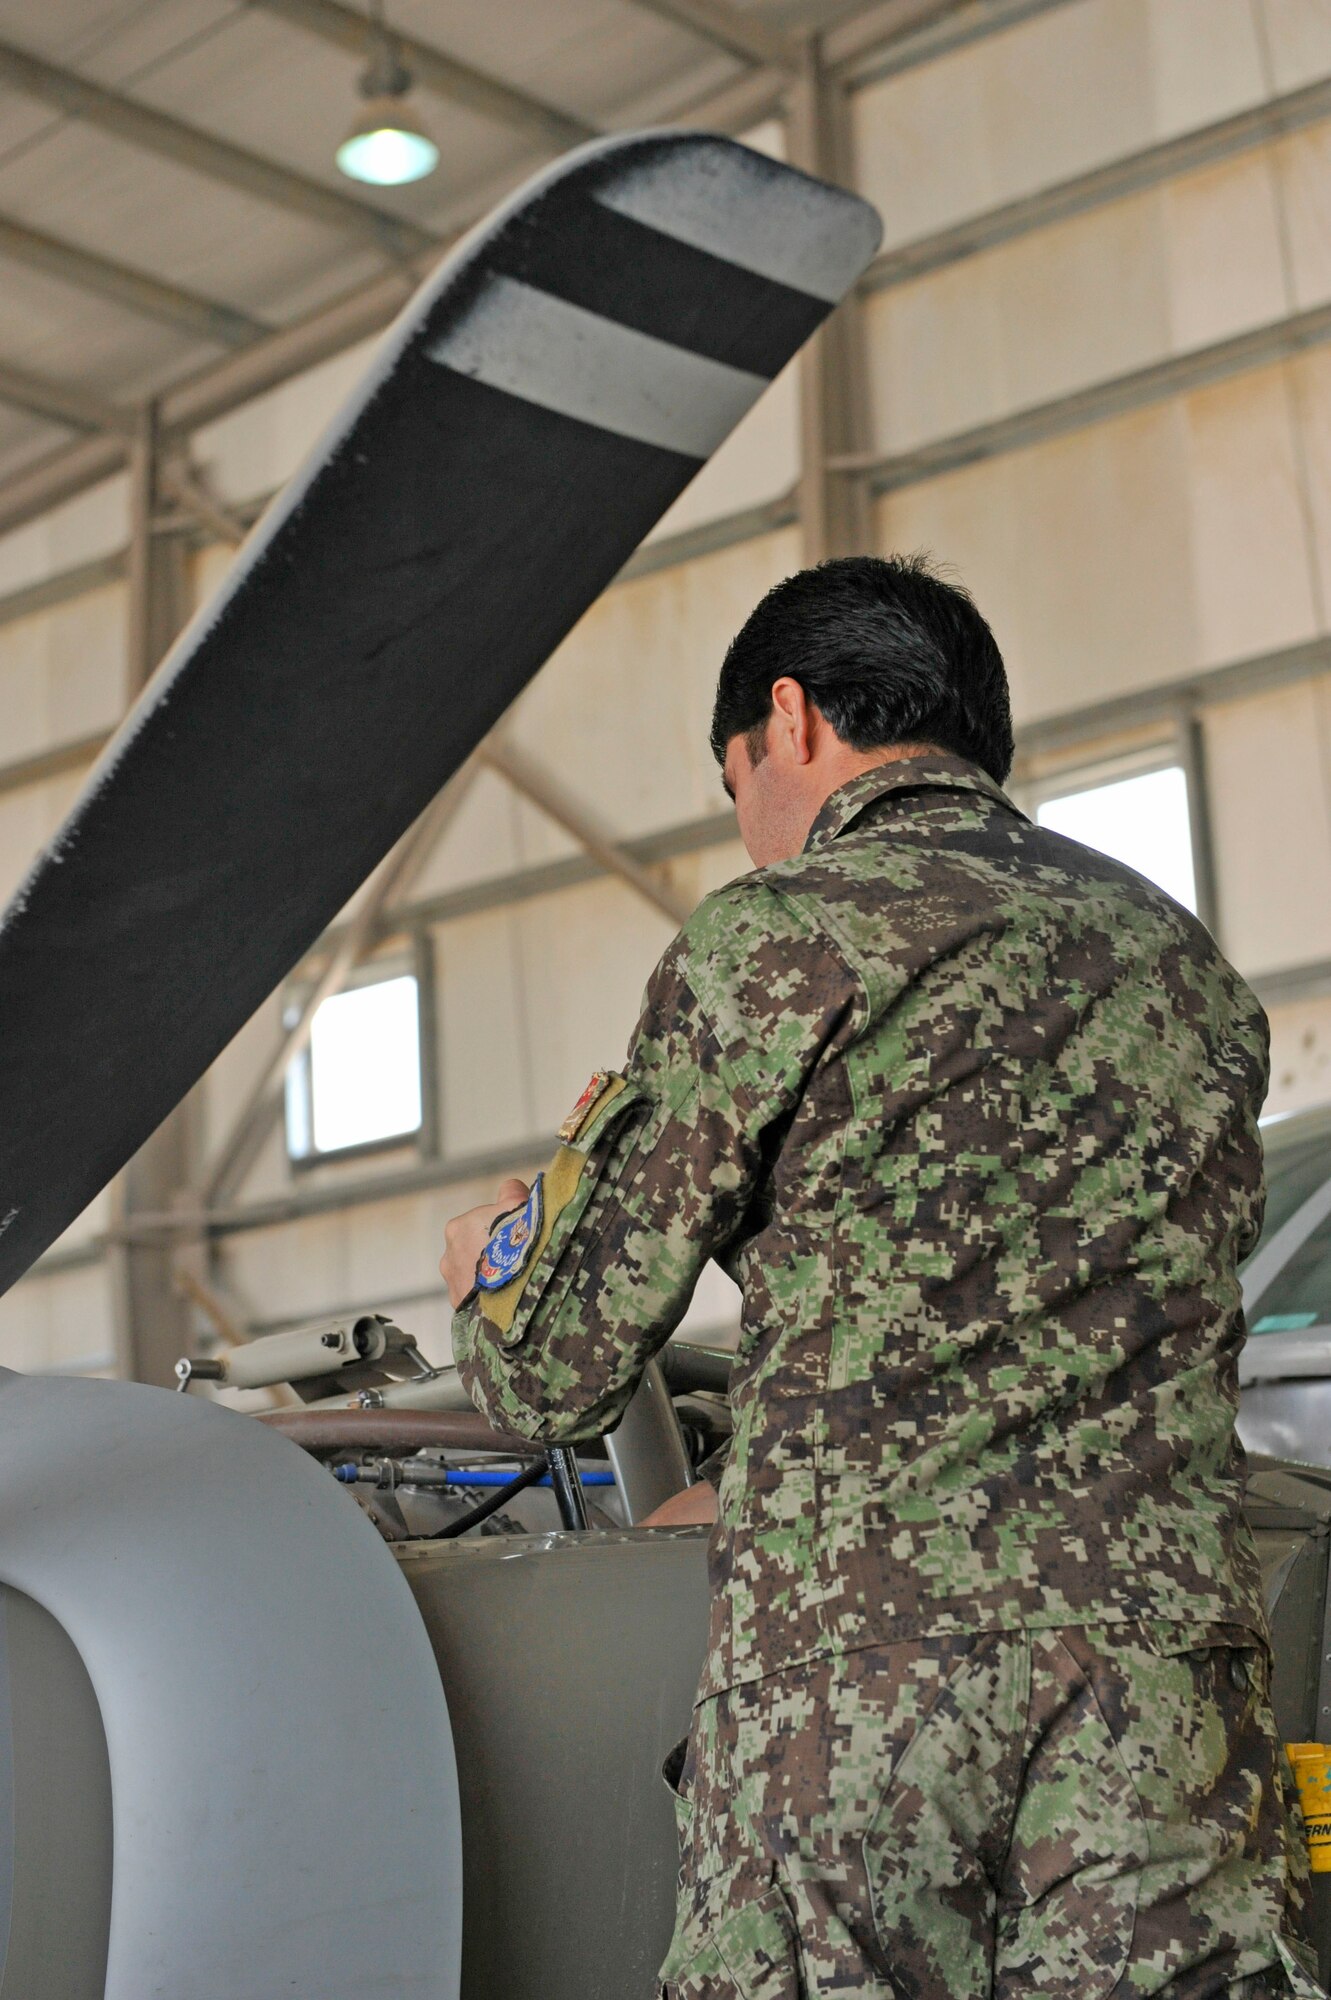 An Afghan aviation maintenance student works on a Cessna 208 engine during training at Shindand Airfield, Afghanistan, March 9, 2014. U.S. military advisors are training Afghan military members to fly and maintain aircraft at Shindand.(U.S. Air Force photo by Senior Master Sgt. Gary J. Rihn)